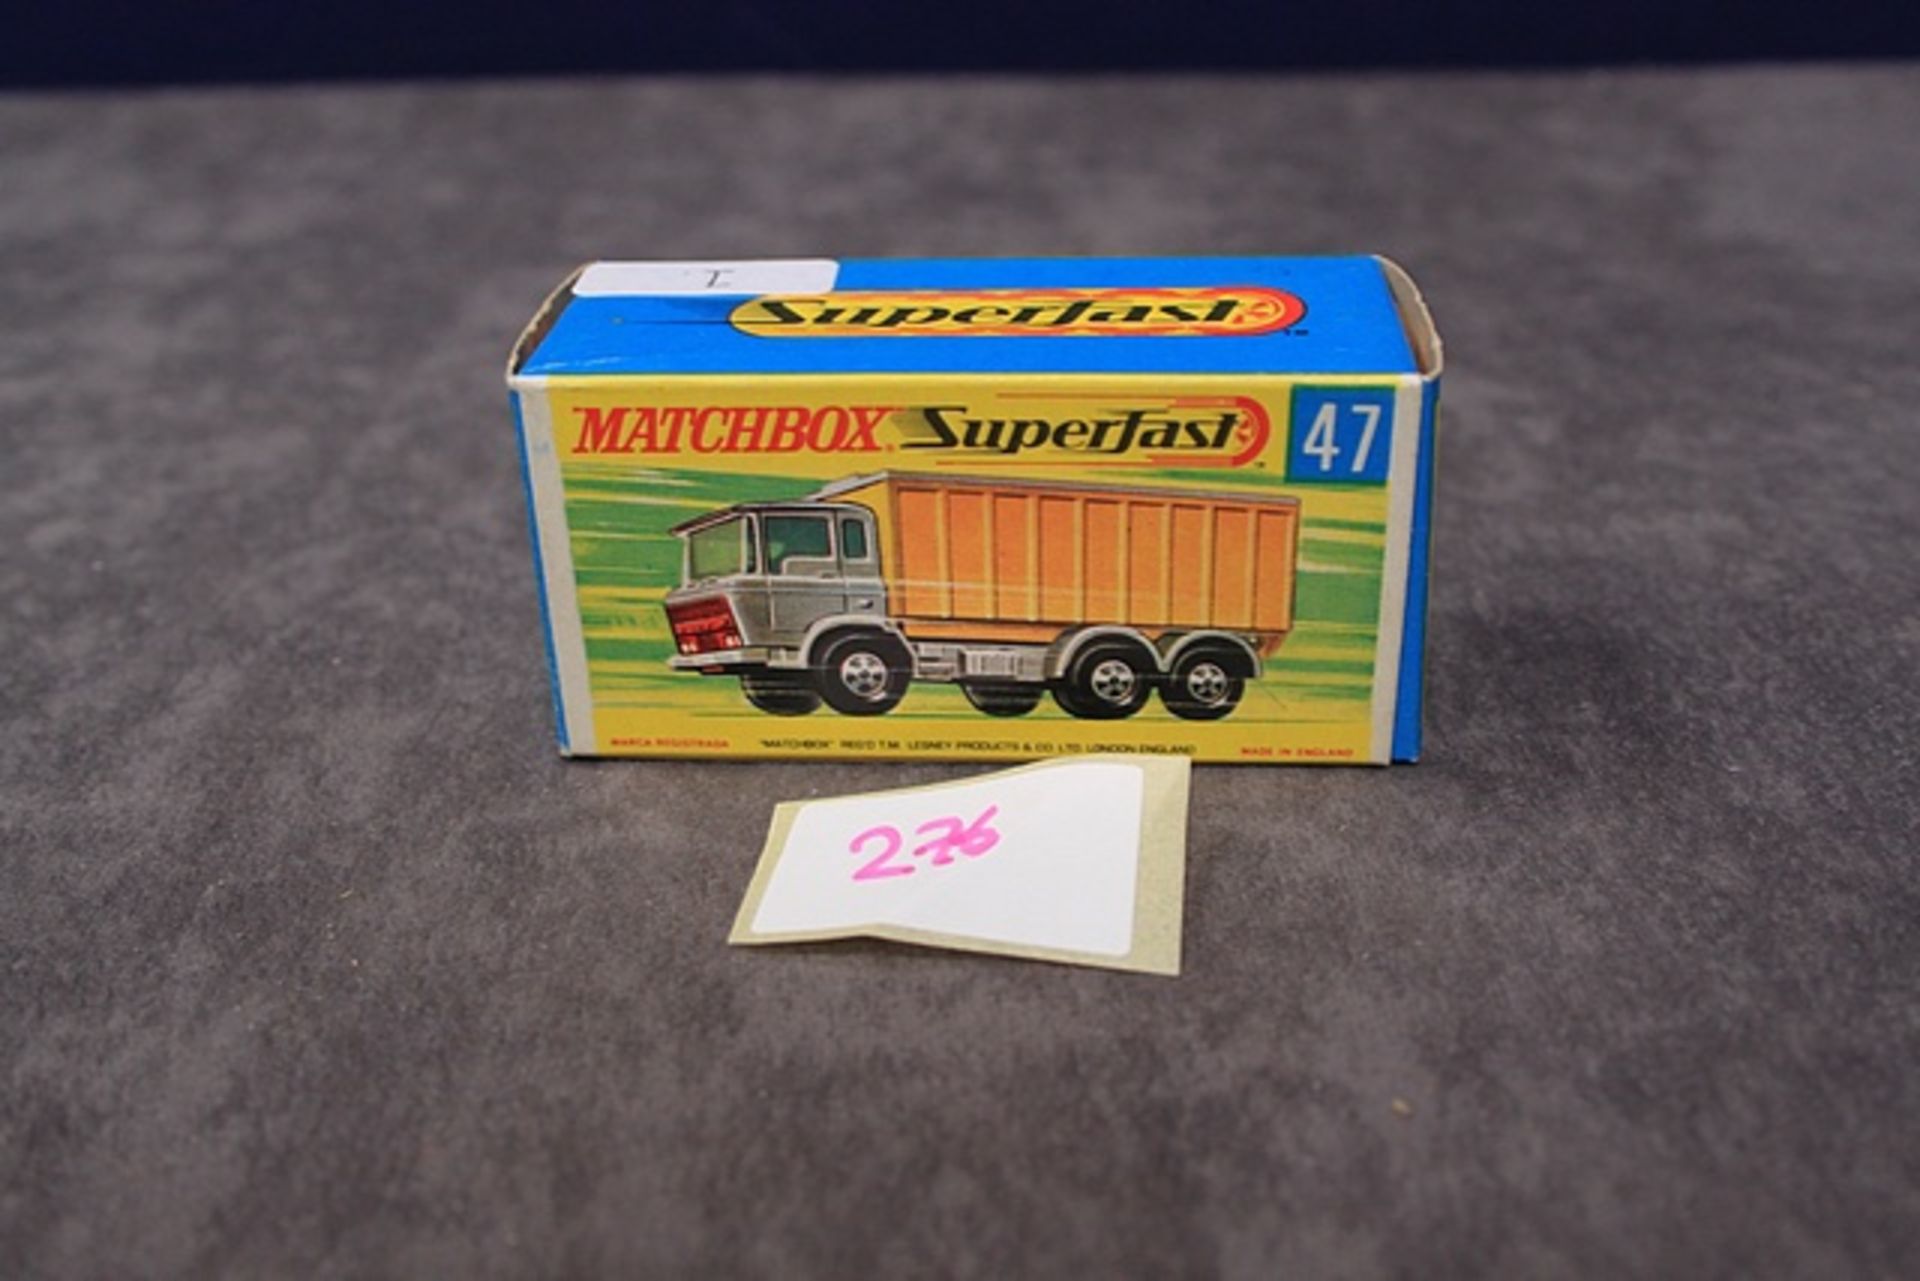 Mint Matchbox Superfast Diecast # 47 DAF Tipper Container Truck In Crisp Box - Image 3 of 4